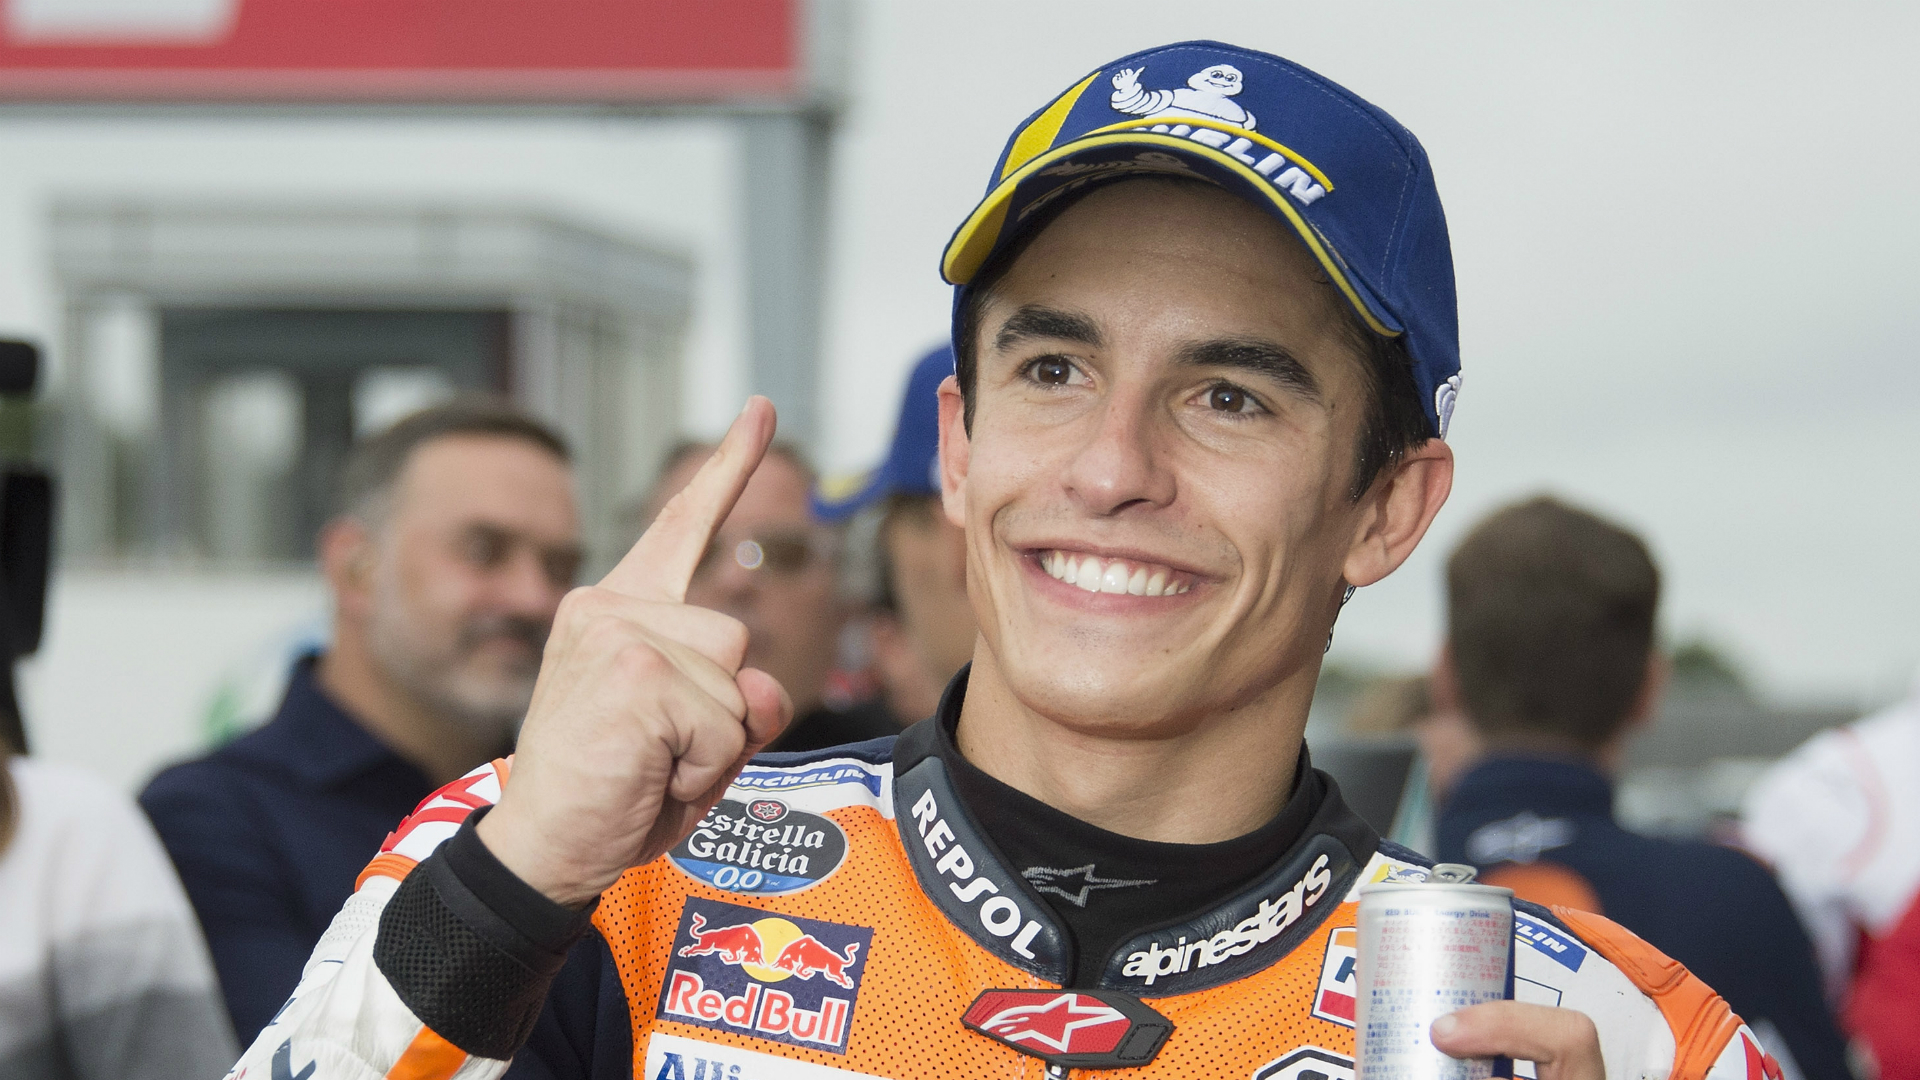 The focus switches from Japan to Australia for Marc Marquez, who was delighted to match a benchmark of the legendary Mick Doohan.